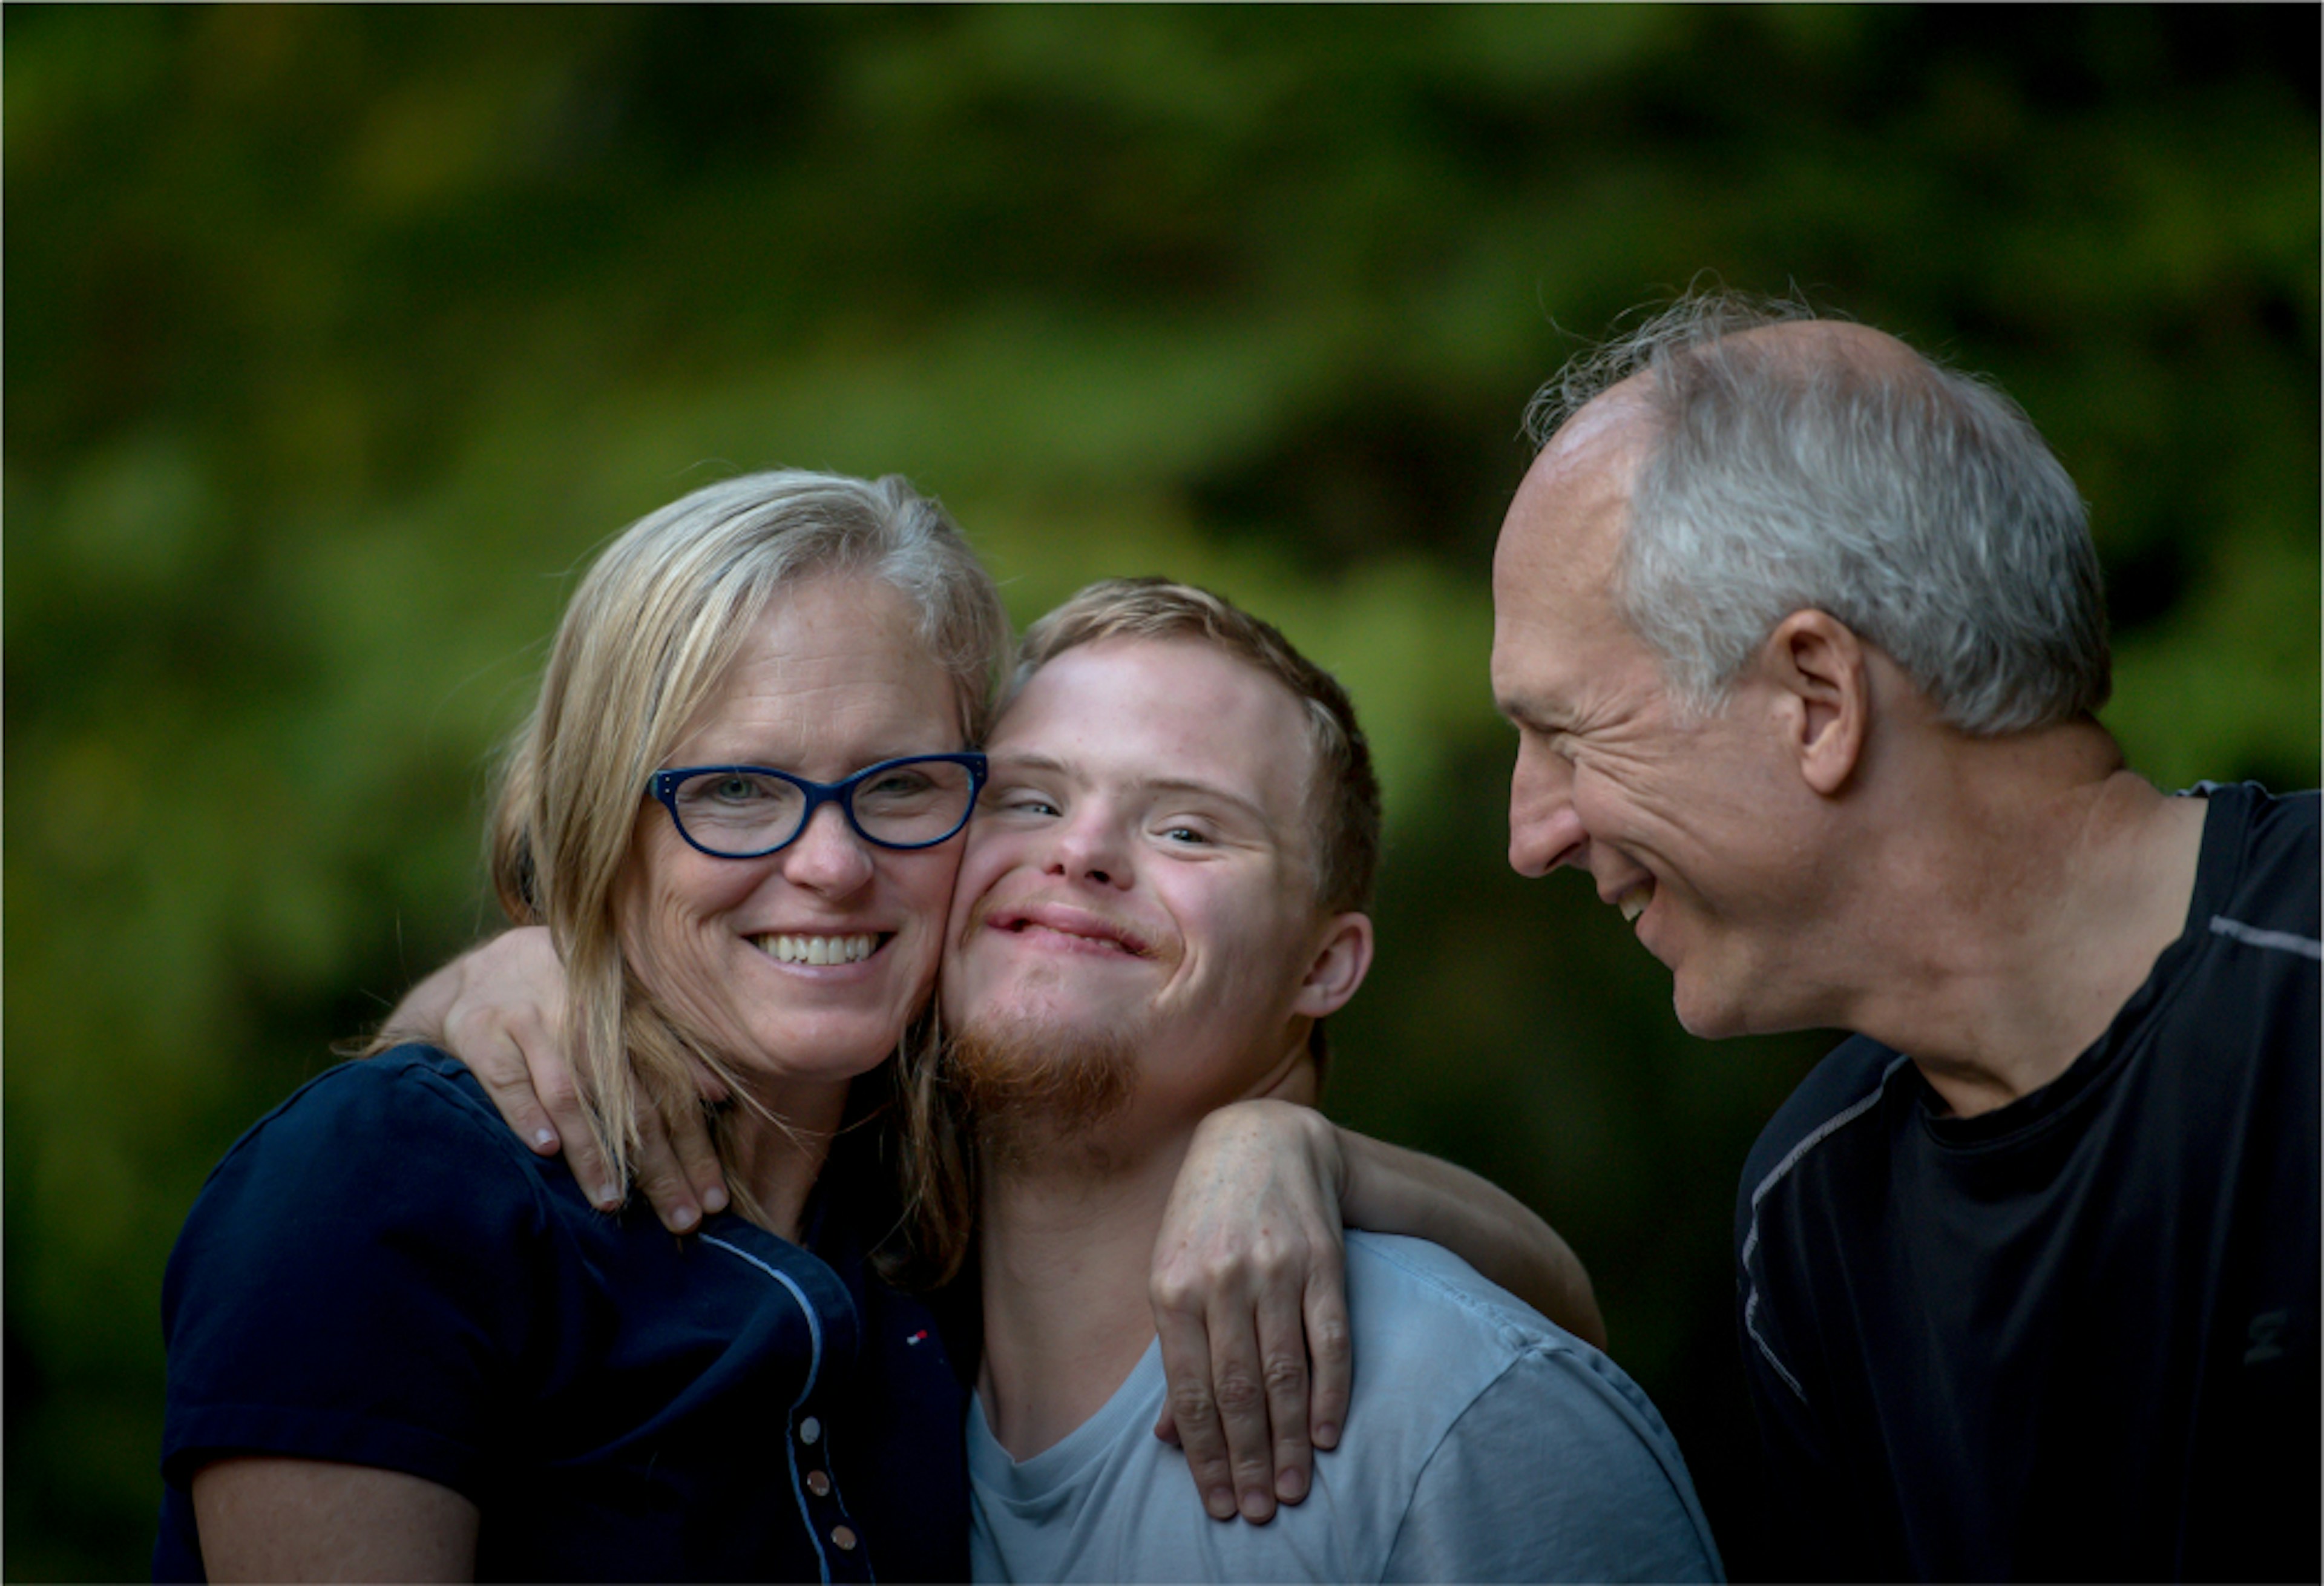 Client and Family Advocate: Family smiling together outside.